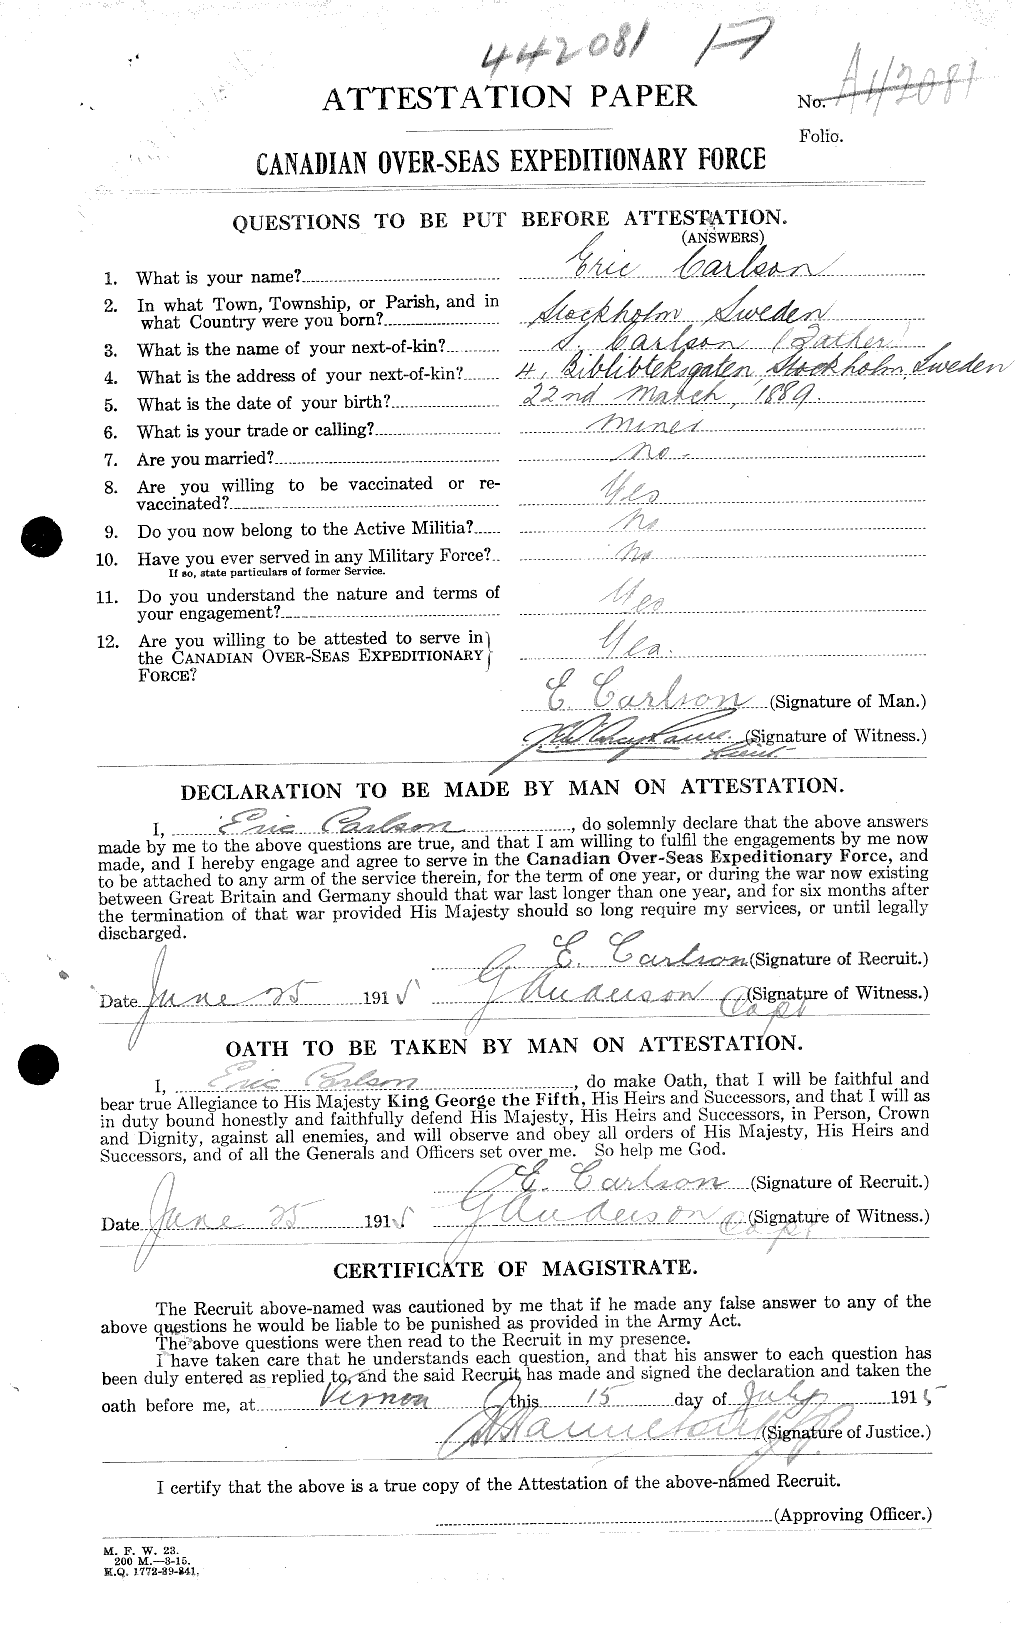 Personnel Records of the First World War - CEF 004533a